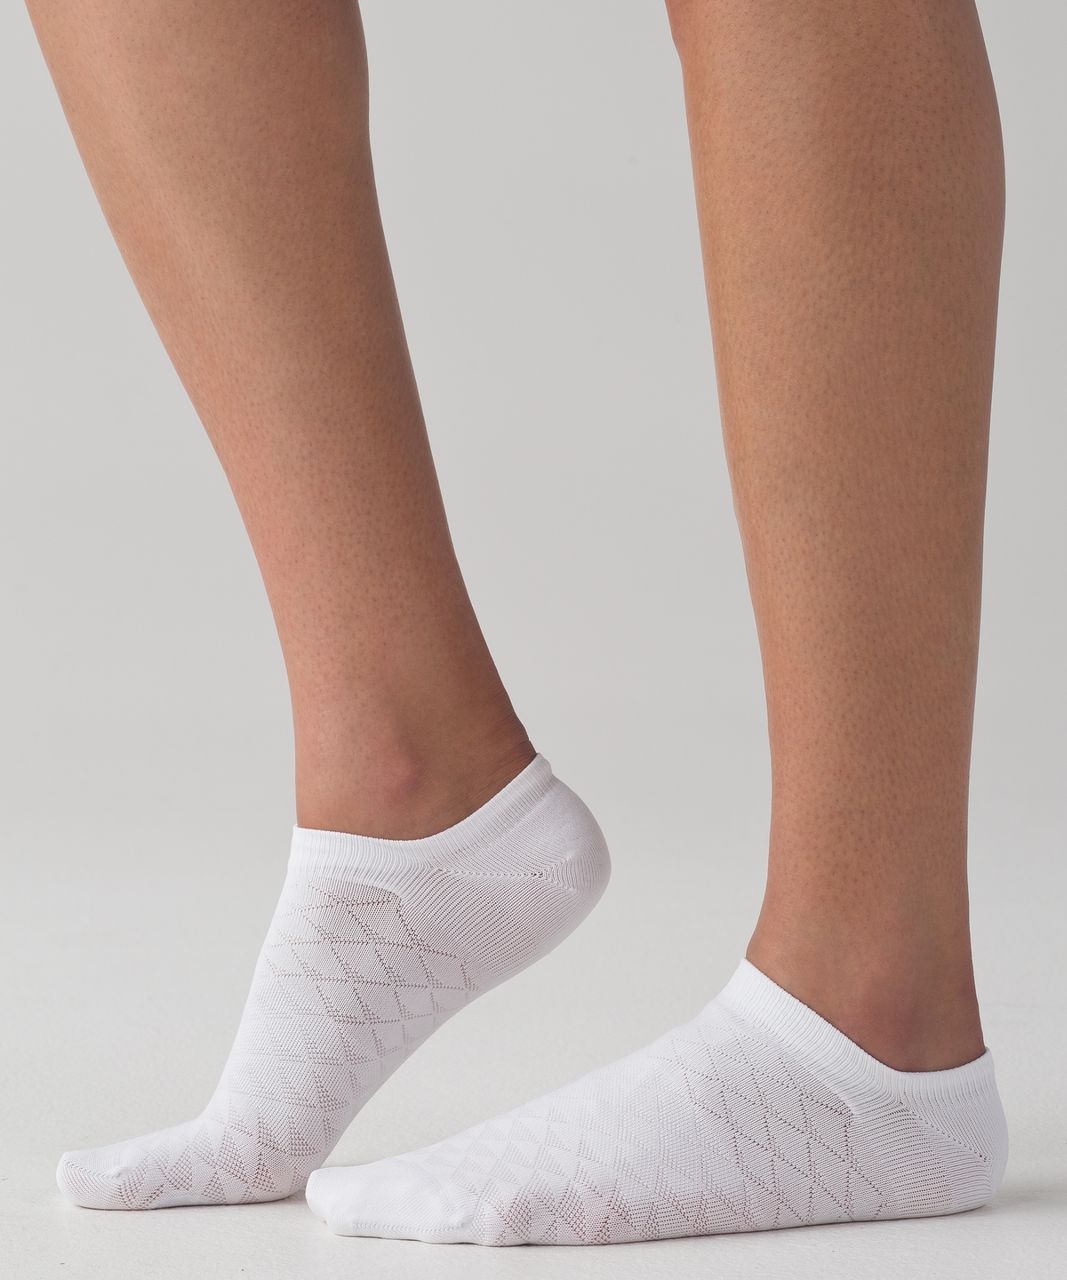 Lululemon Play All Day Sock - White (First Release)